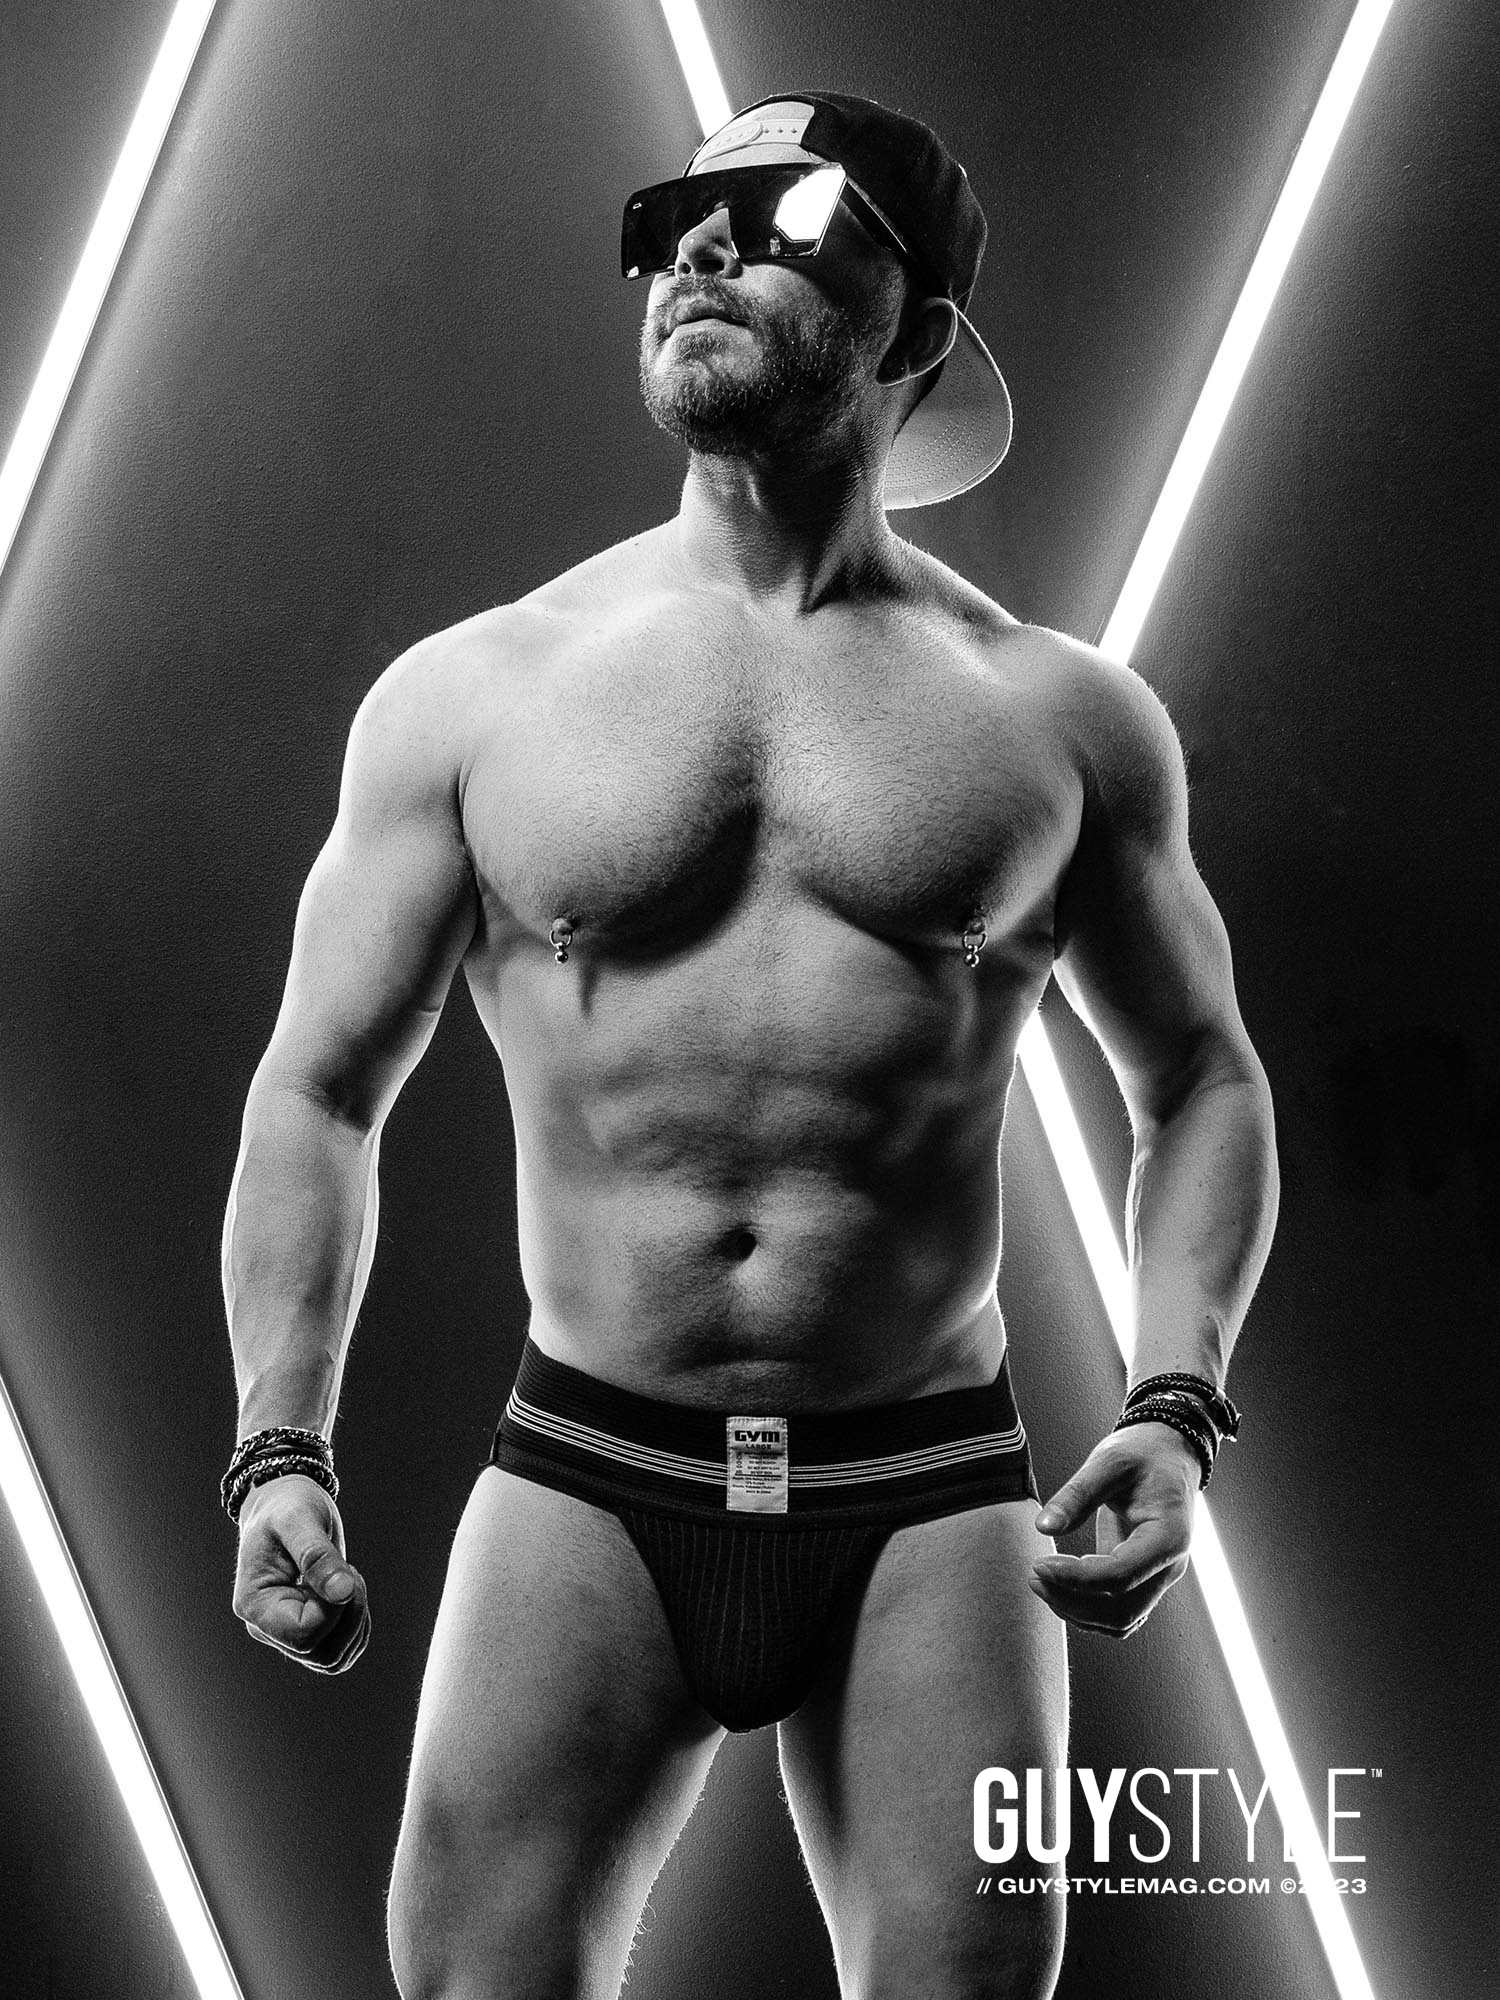 The Classic GYM Jockstrap: Athletic Elegance and Hefty Bulge Redefined – Men's Underwear Reviews with Fitness Model Maxwell Alexander